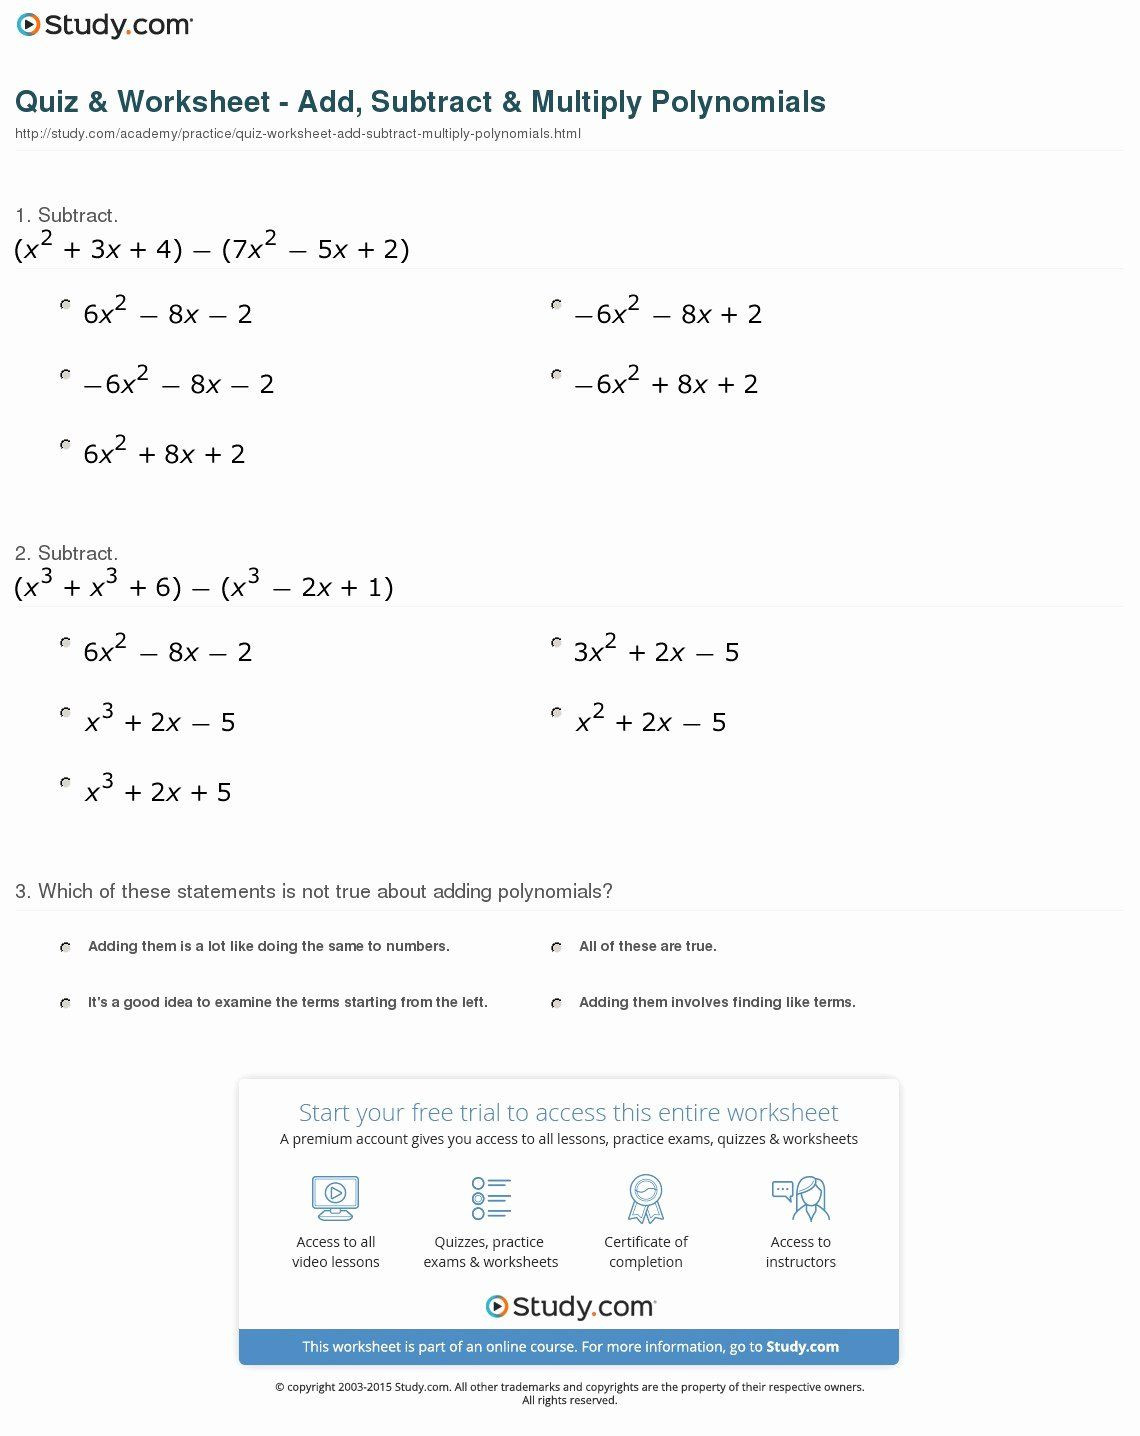 Multiplying Monomials Worksheet Answers 50 Multiplying Monomials Worksheet Answers In 2020